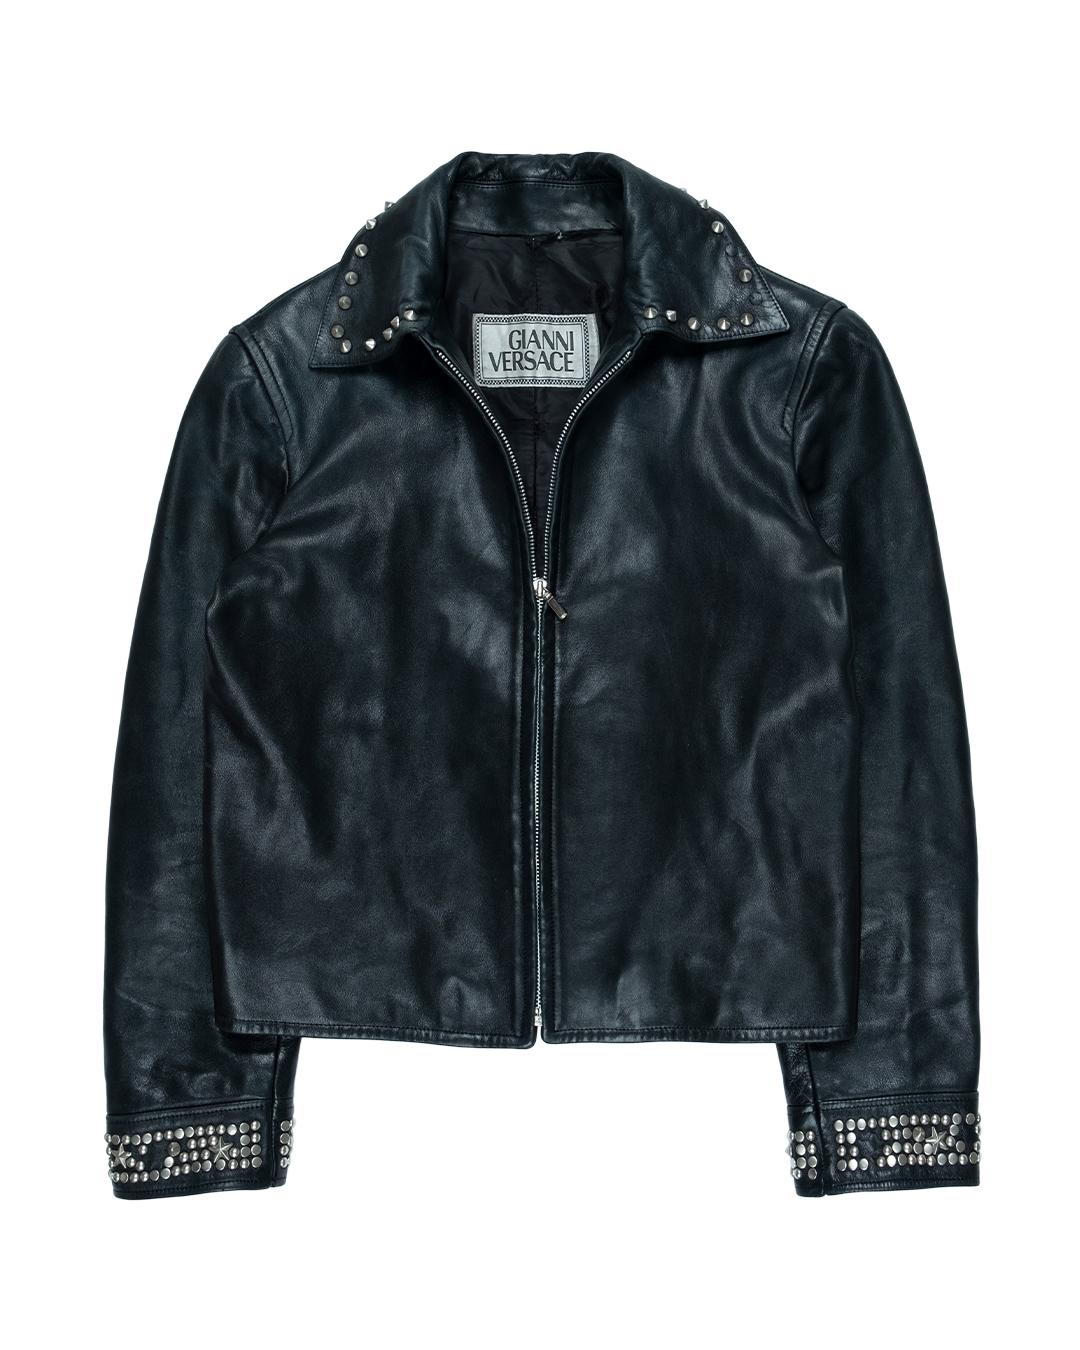 Gianni Versace Studded Leather Jacket In Good Condition For Sale In Beverly Hills, CA